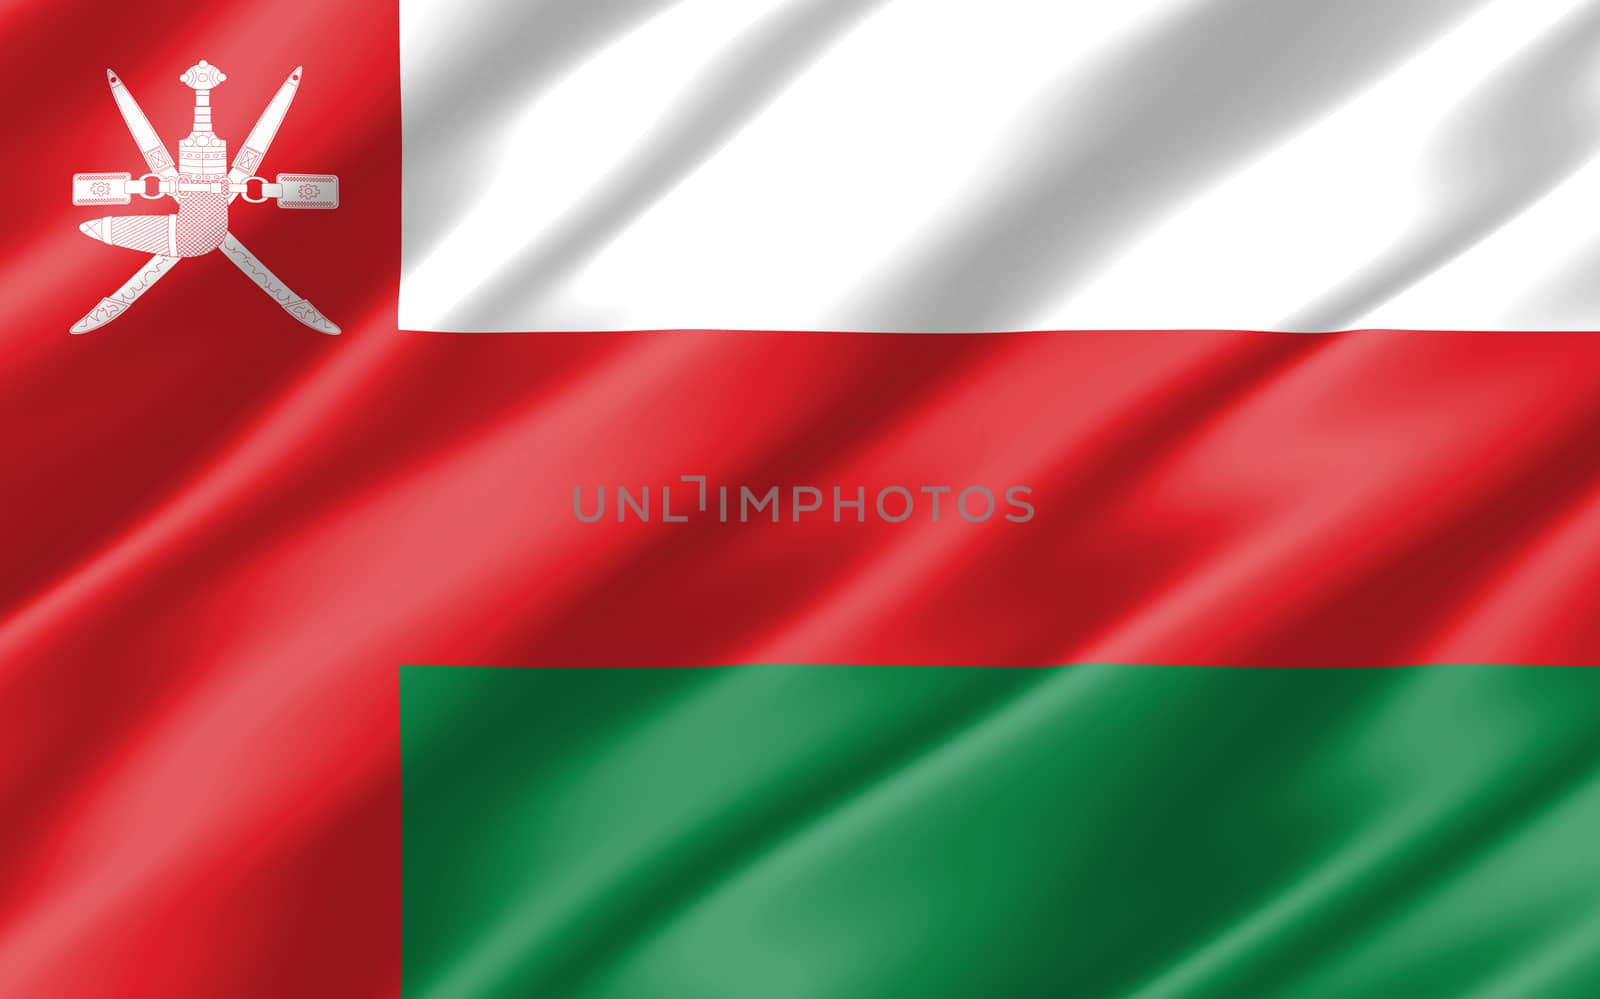 Silk wavy flag of Oman graphic. Wavy Omani flag illustration. Rippled Oman country flag is a symbol of freedom, patriotism and independence. by Skylark